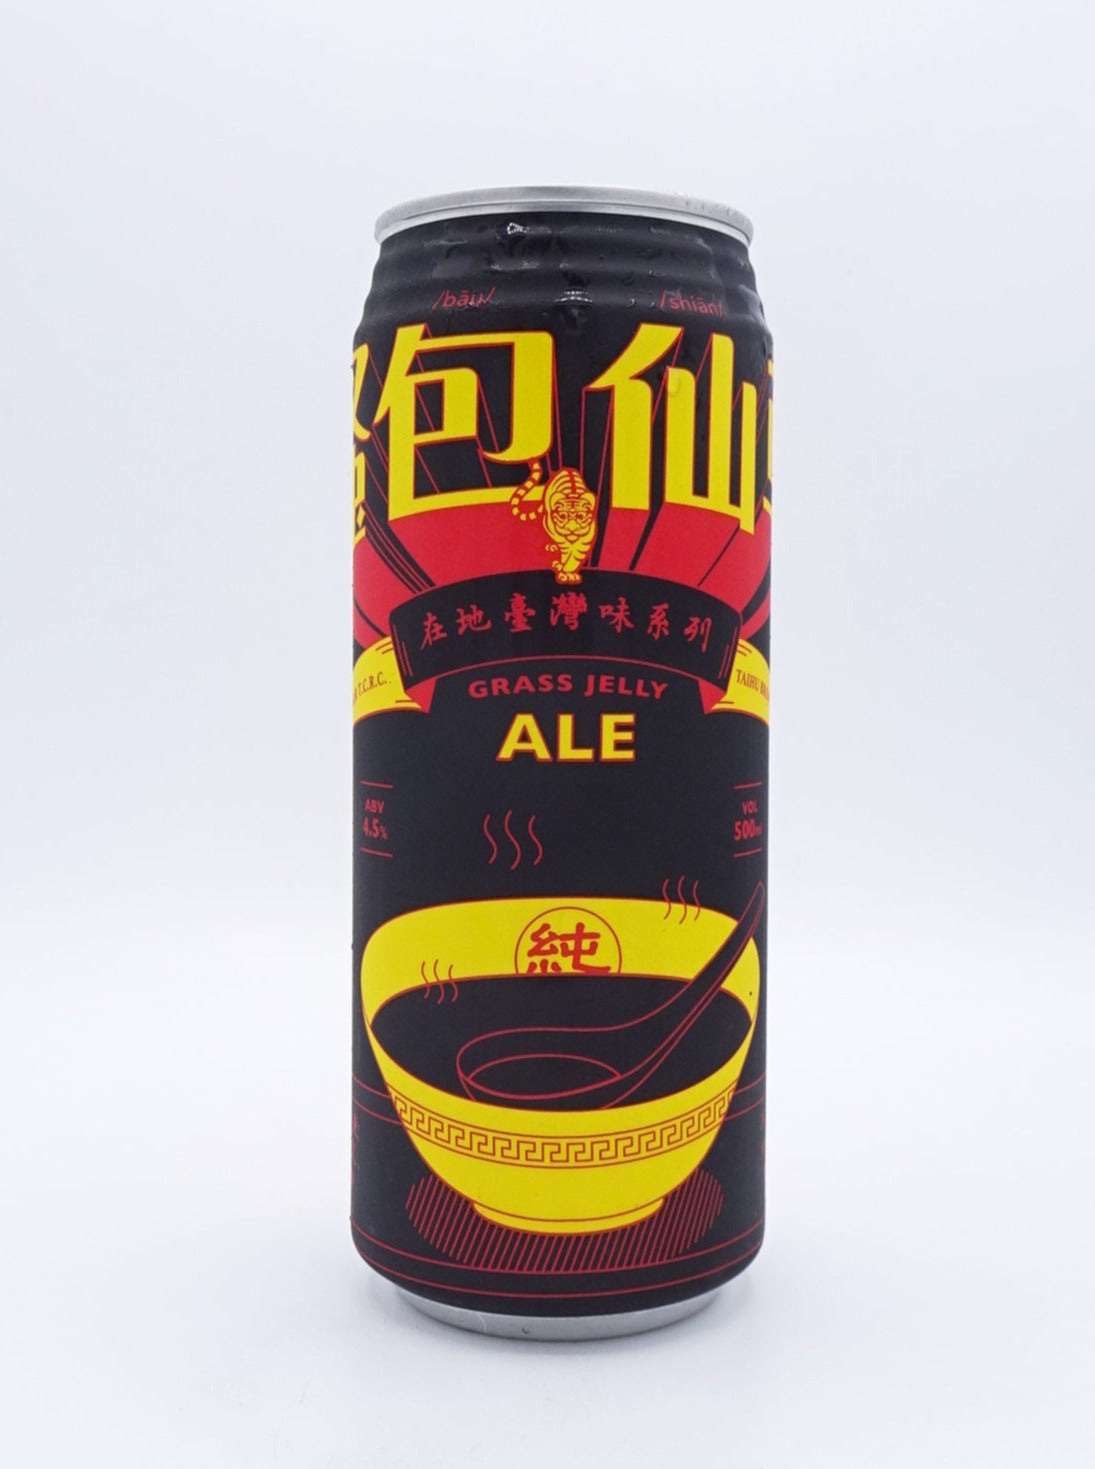 GRASS JELLY ALE / グラスジェリーエール 騷包仙草